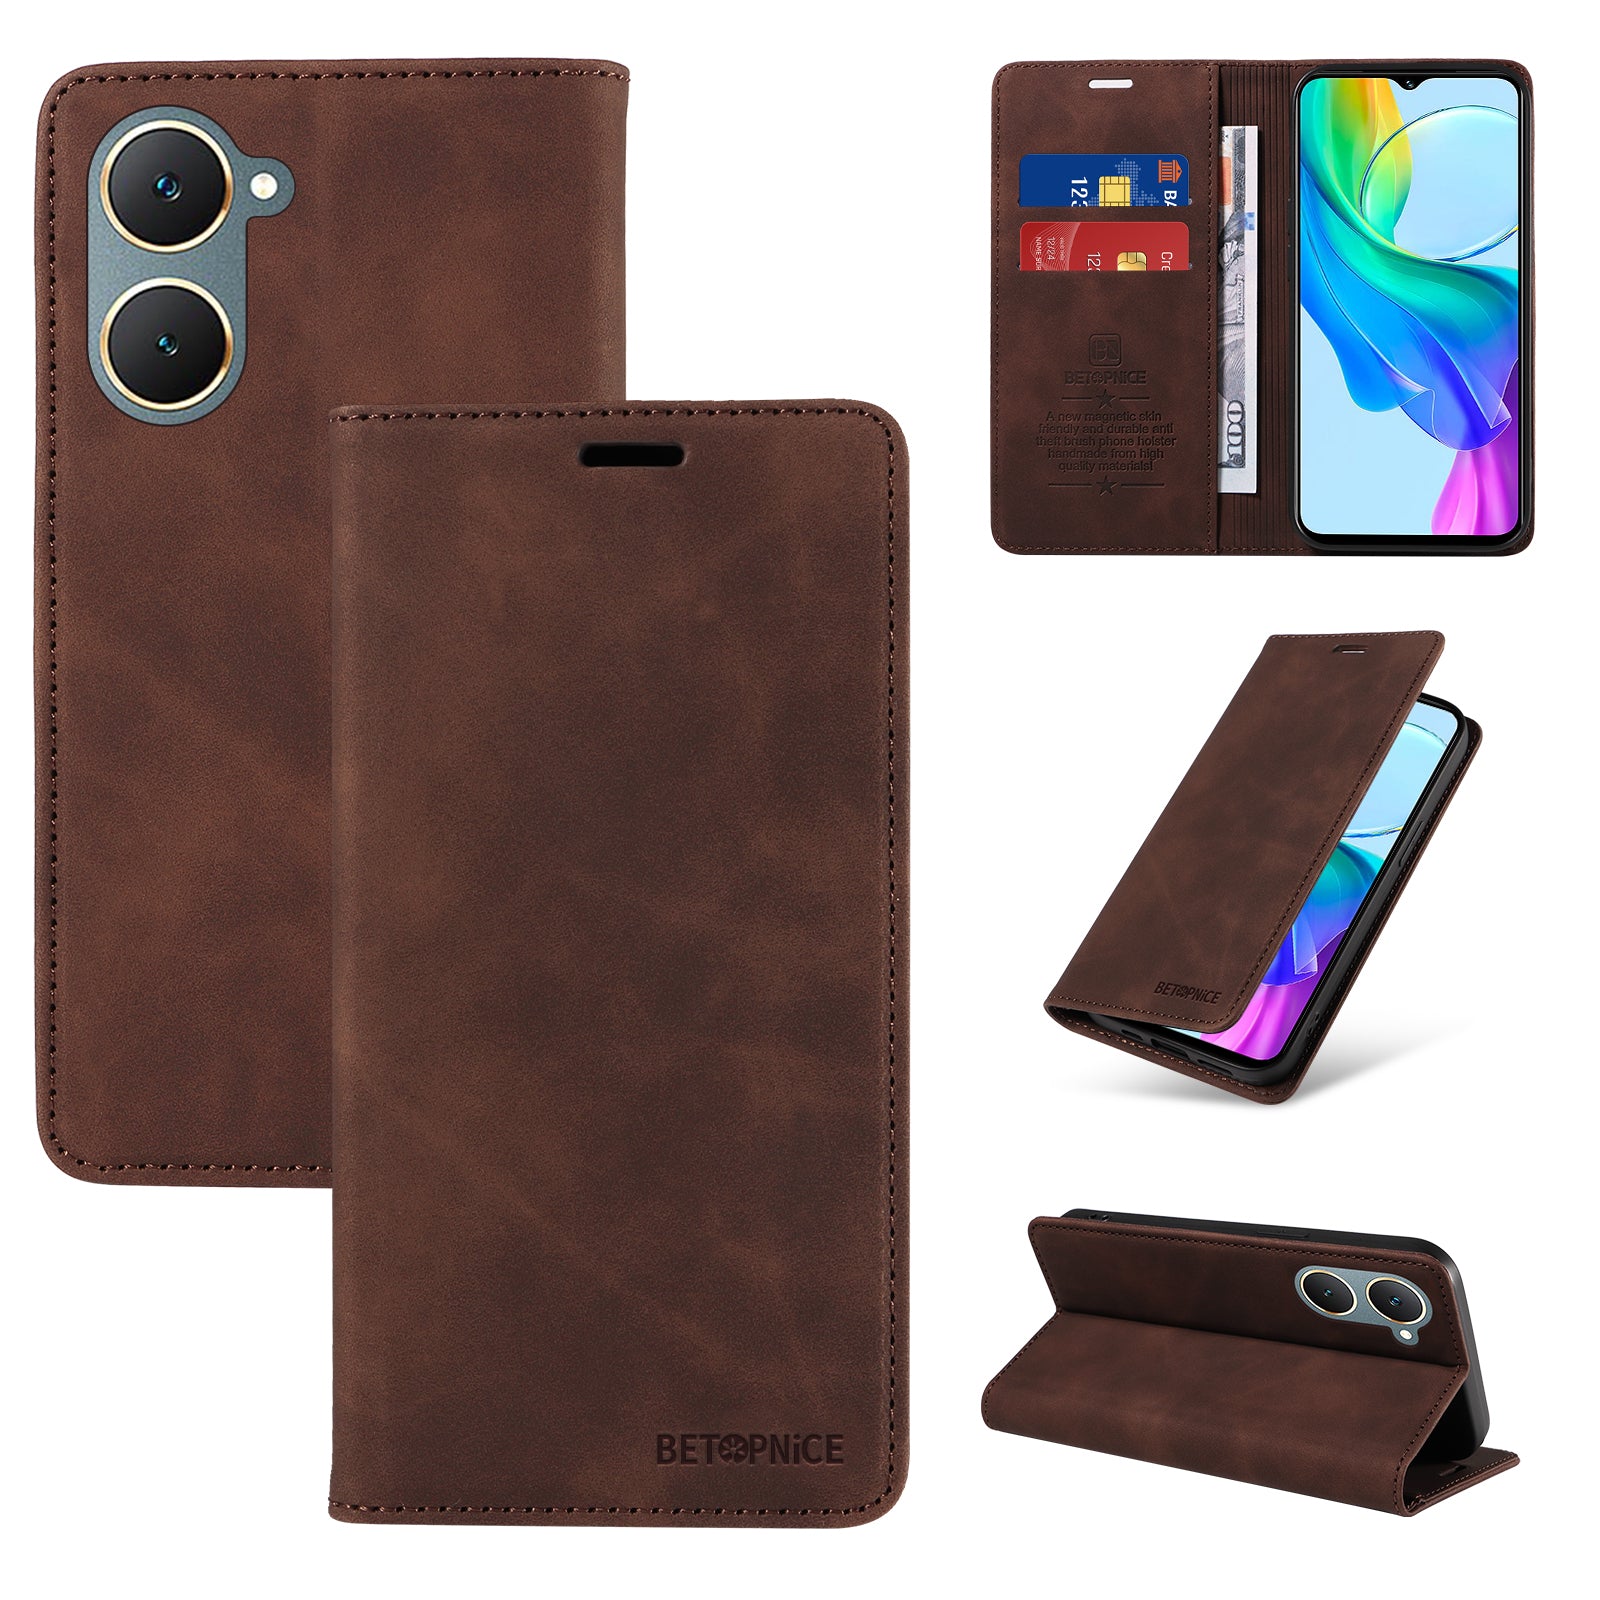 BETOPNICE 003 For vivo Y03 Case RFID Blocking Wallet Leather Flip Phone Cover - Brown